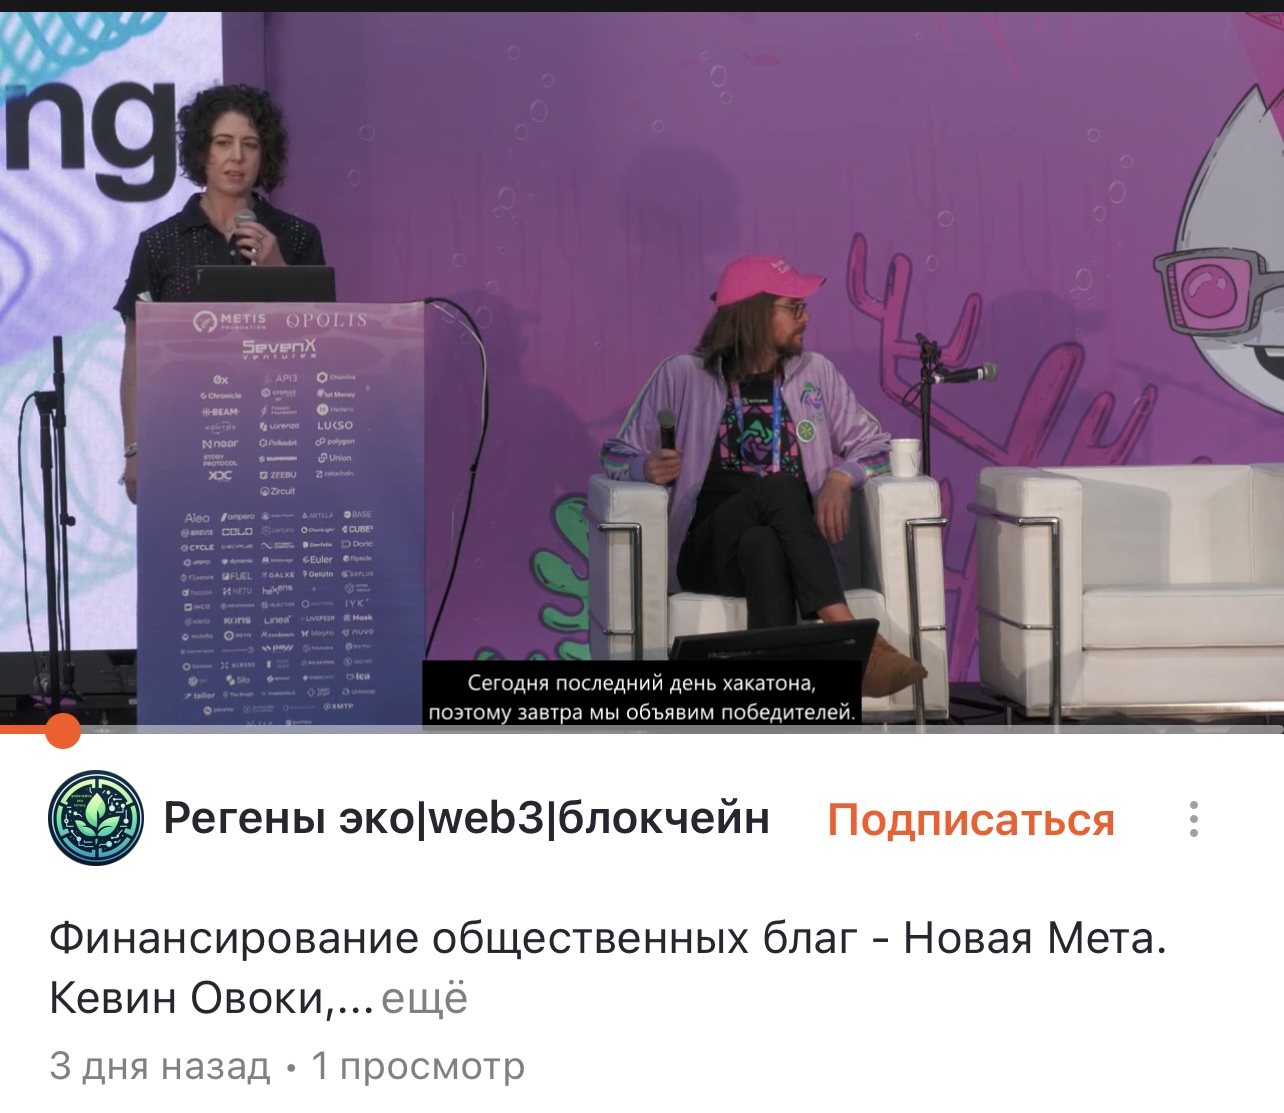 Owocky EthDenver Gitcoin 2.0 presentation. With Russian subtitles on Russian speaking platform